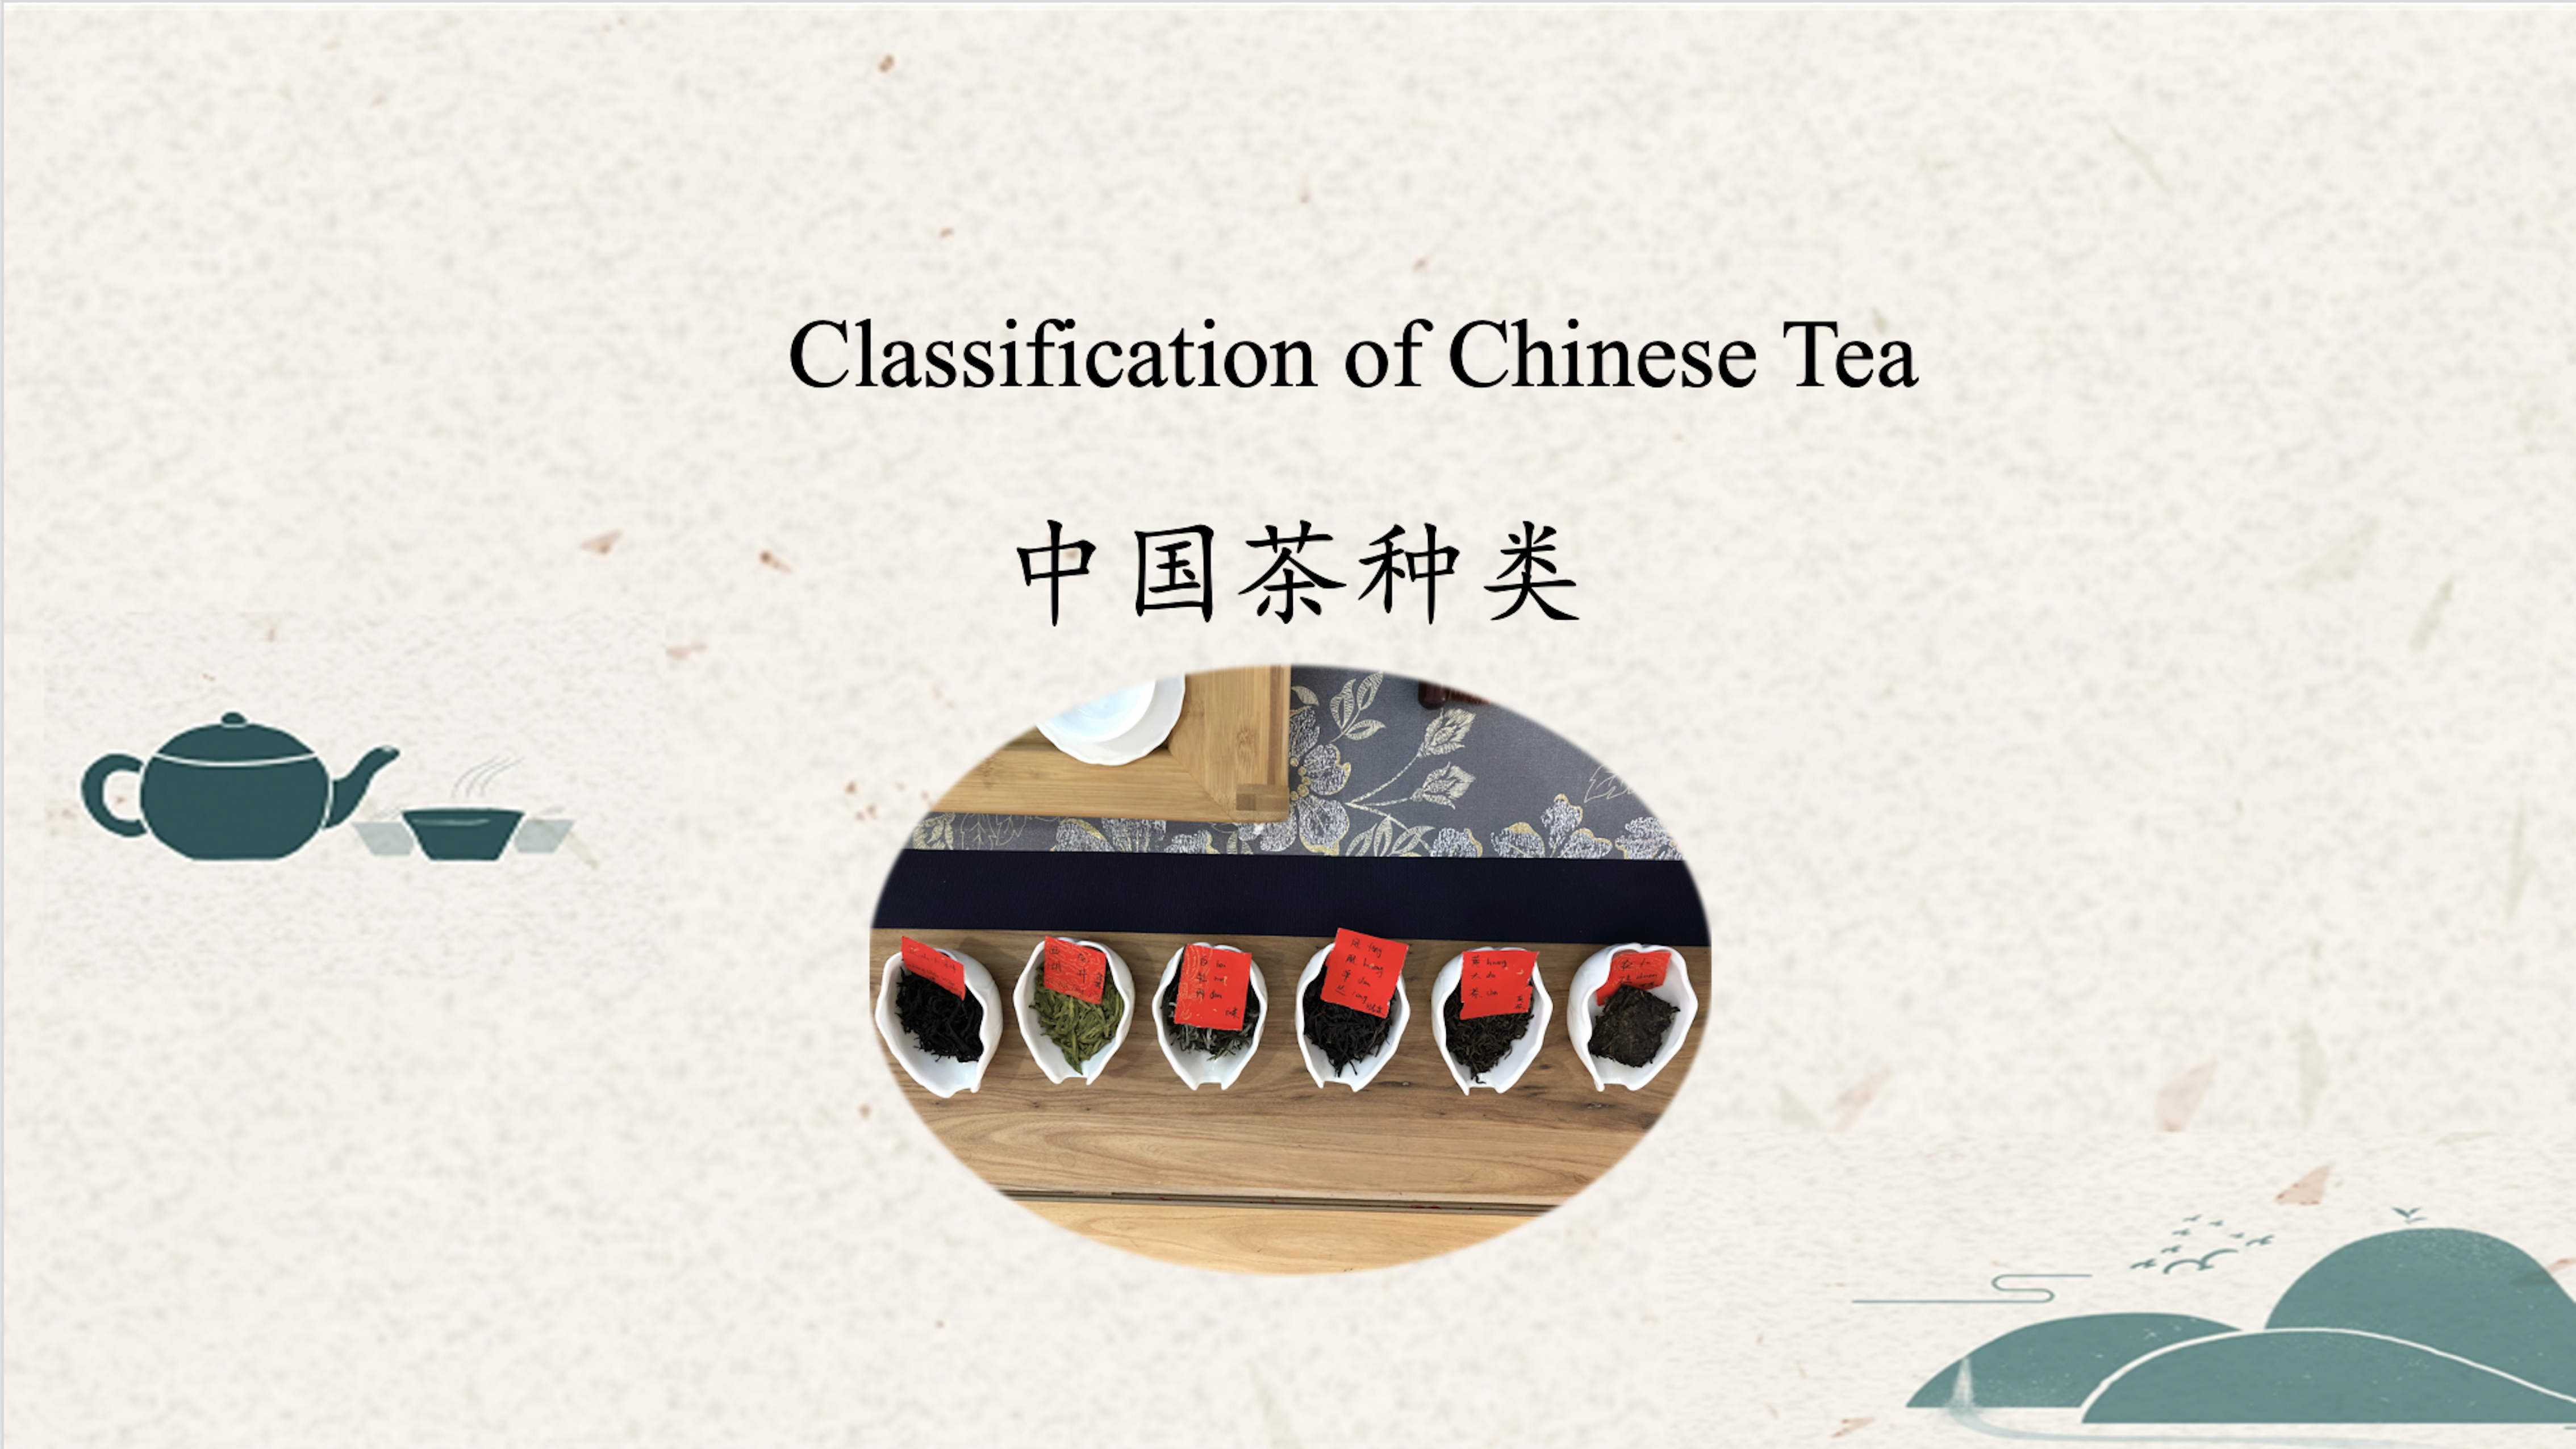 Classification of Chinese Tea